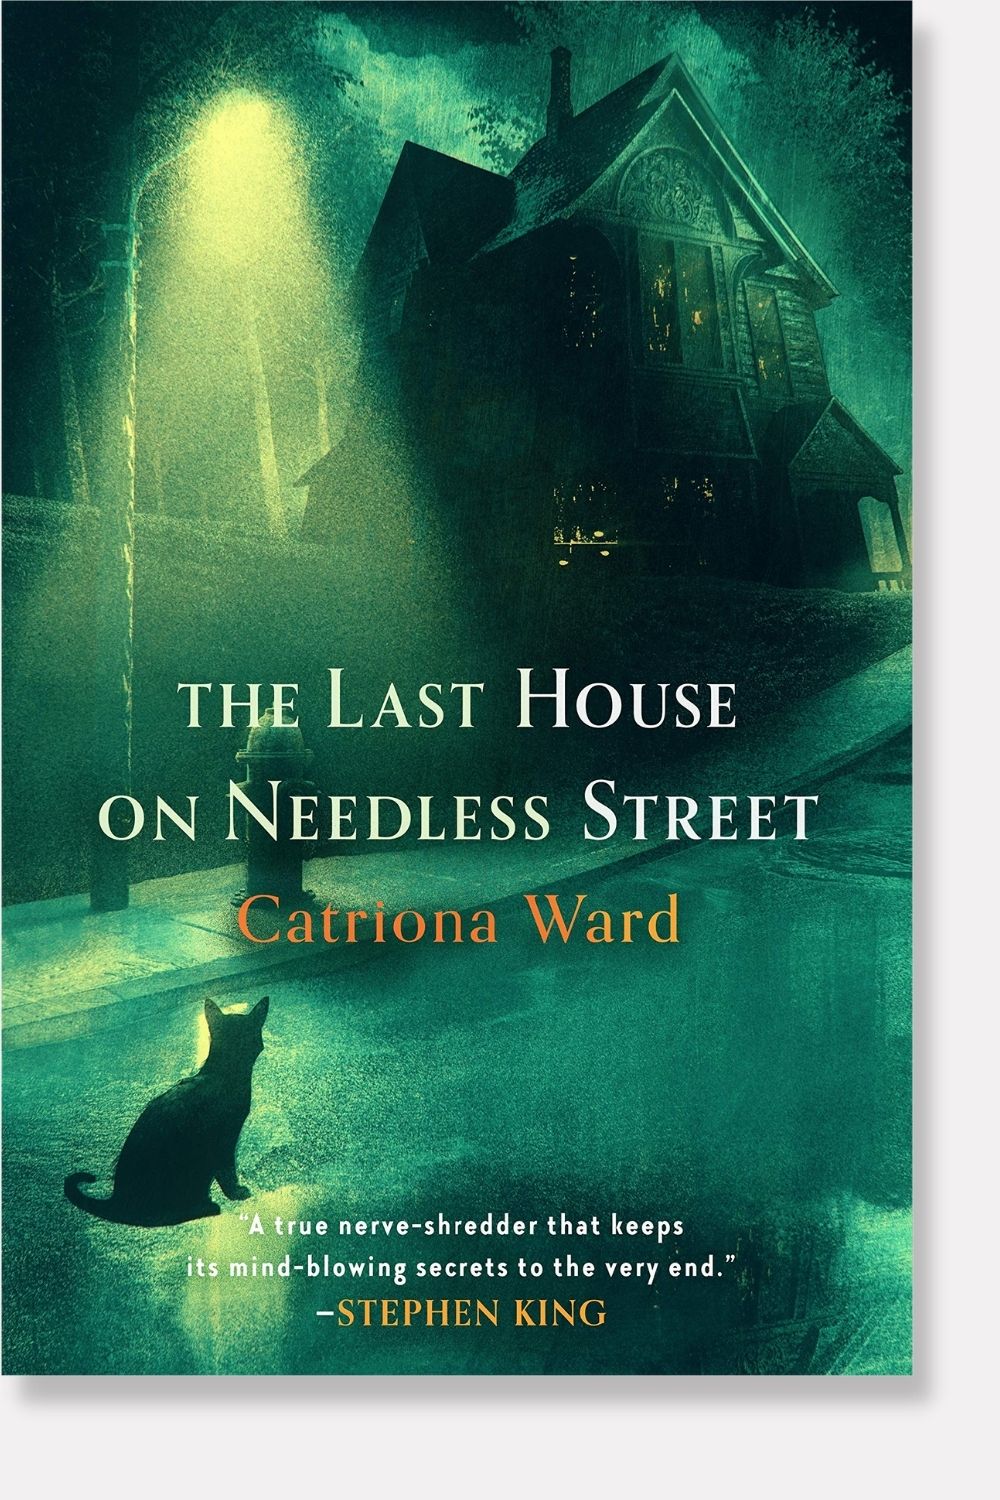 The Last House on Needless Street book cover